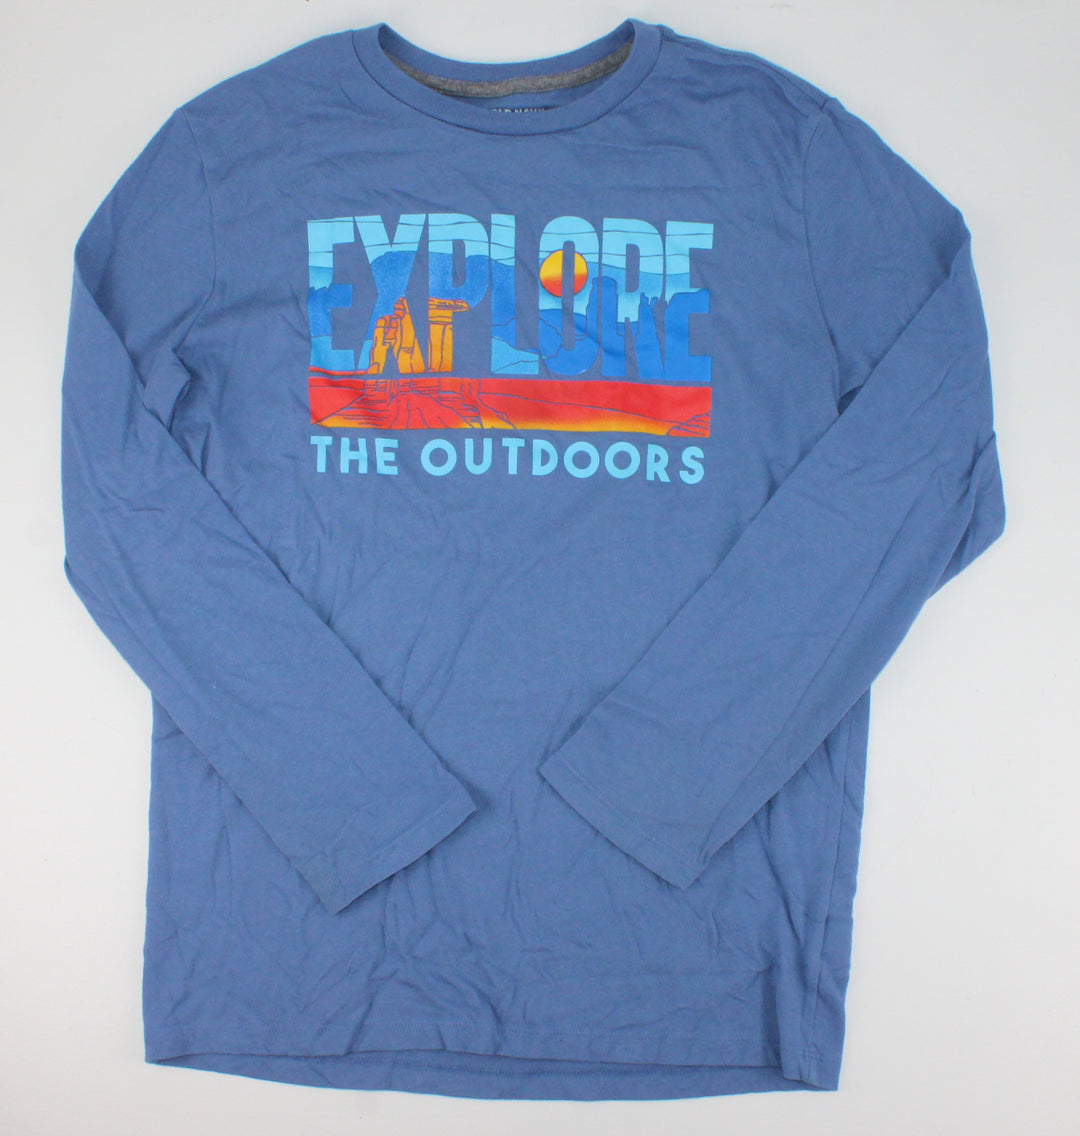 OLD NAVY EXPLORE THE OUTDOORS LONG SLEEVE TOP 18Y EUC